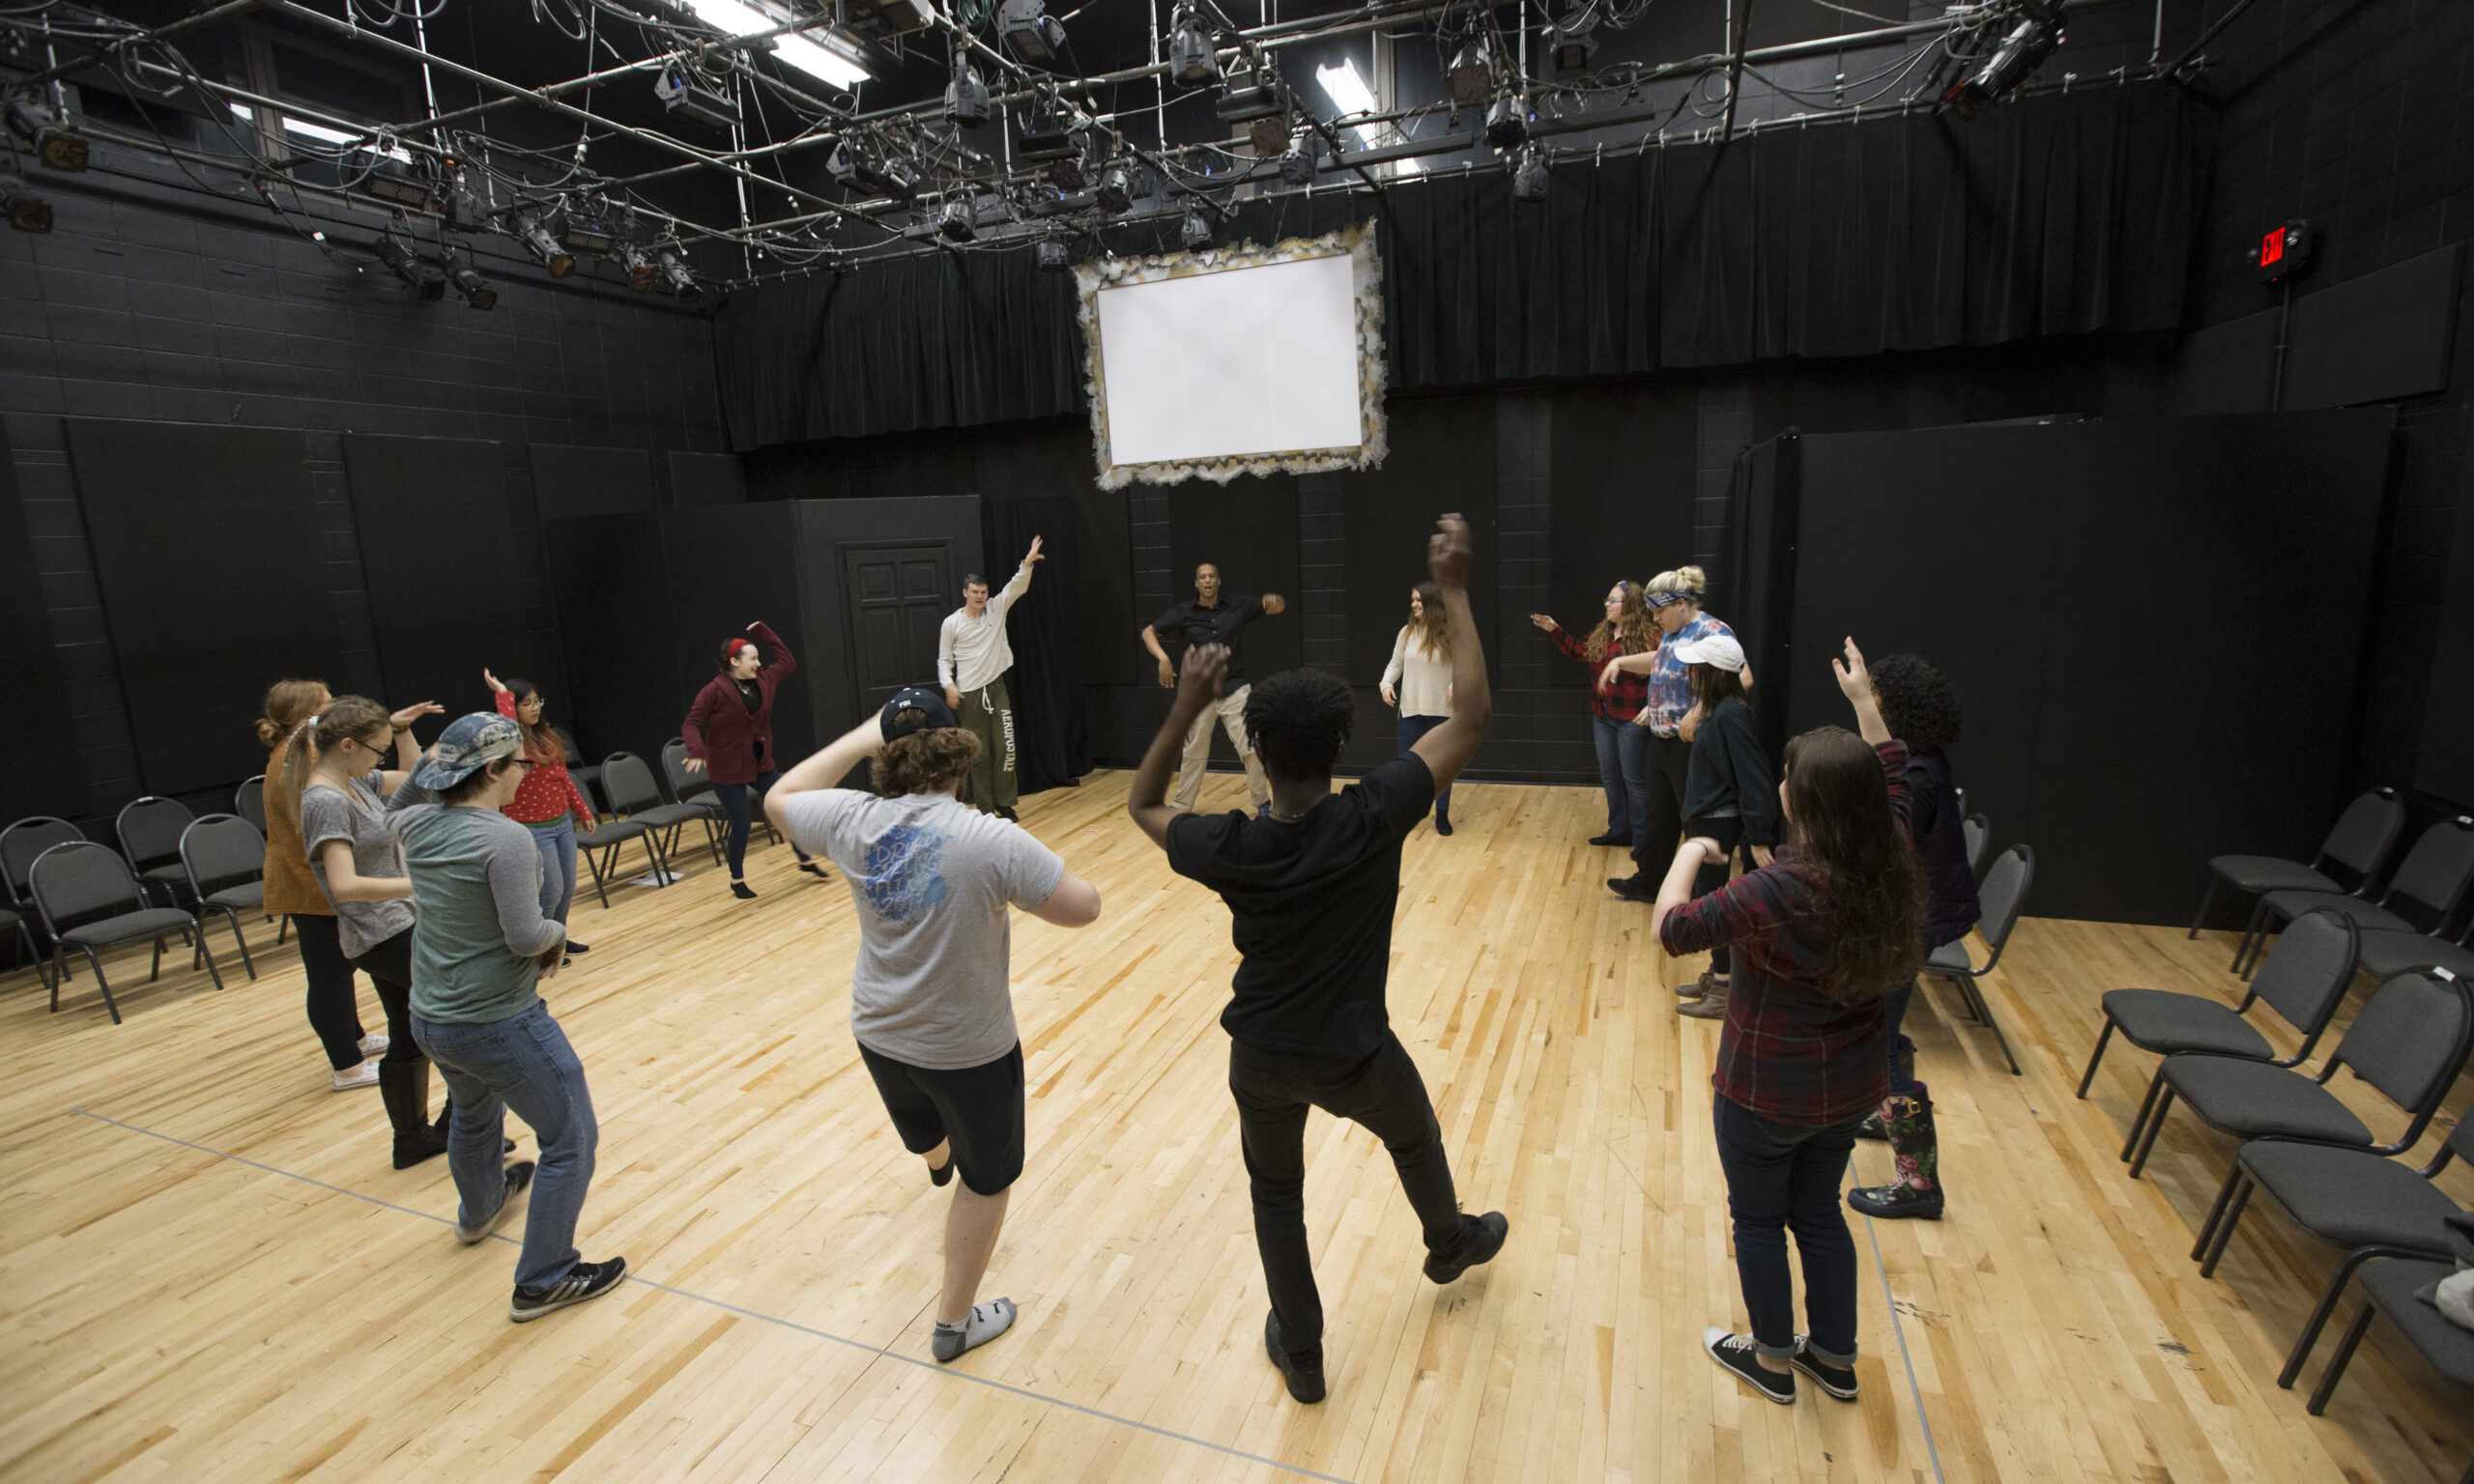 Students participating in an improv exercise.